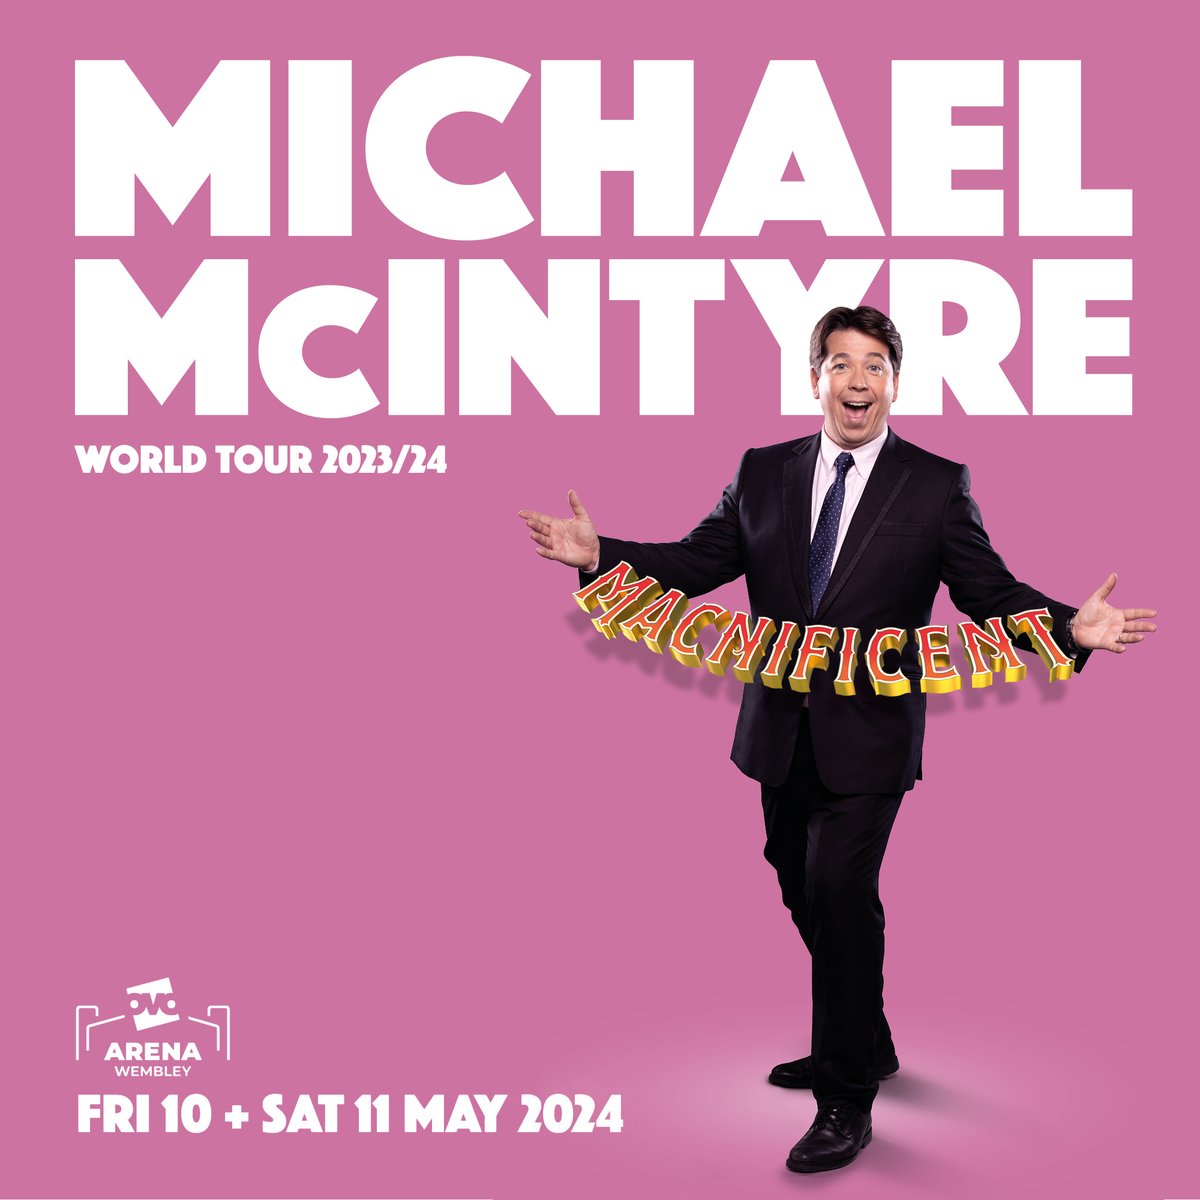 Under a week to go until #MichaelMcIntyre brings #MACNIFICENT to @OVOArena. 🎟️ Just a few tickets left - grab yours here ⬇️ bit.ly/OVOMCLMCTYR 🟢 Premium Experiences: ovoarenawembley.seatunique.com